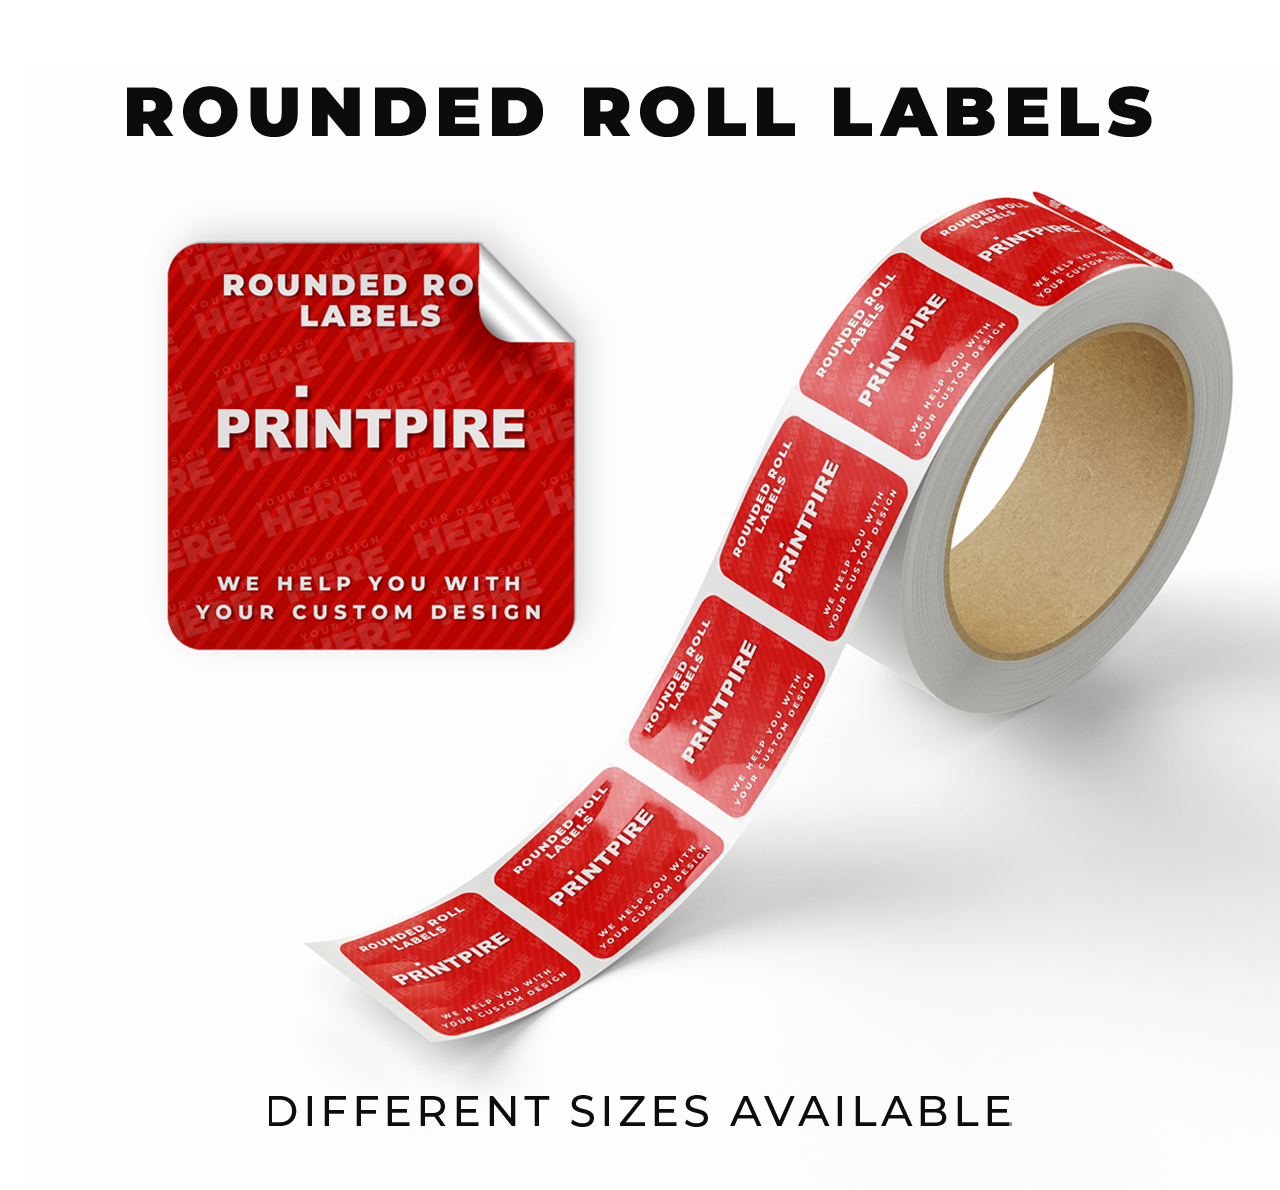 Rounded Roll Labels